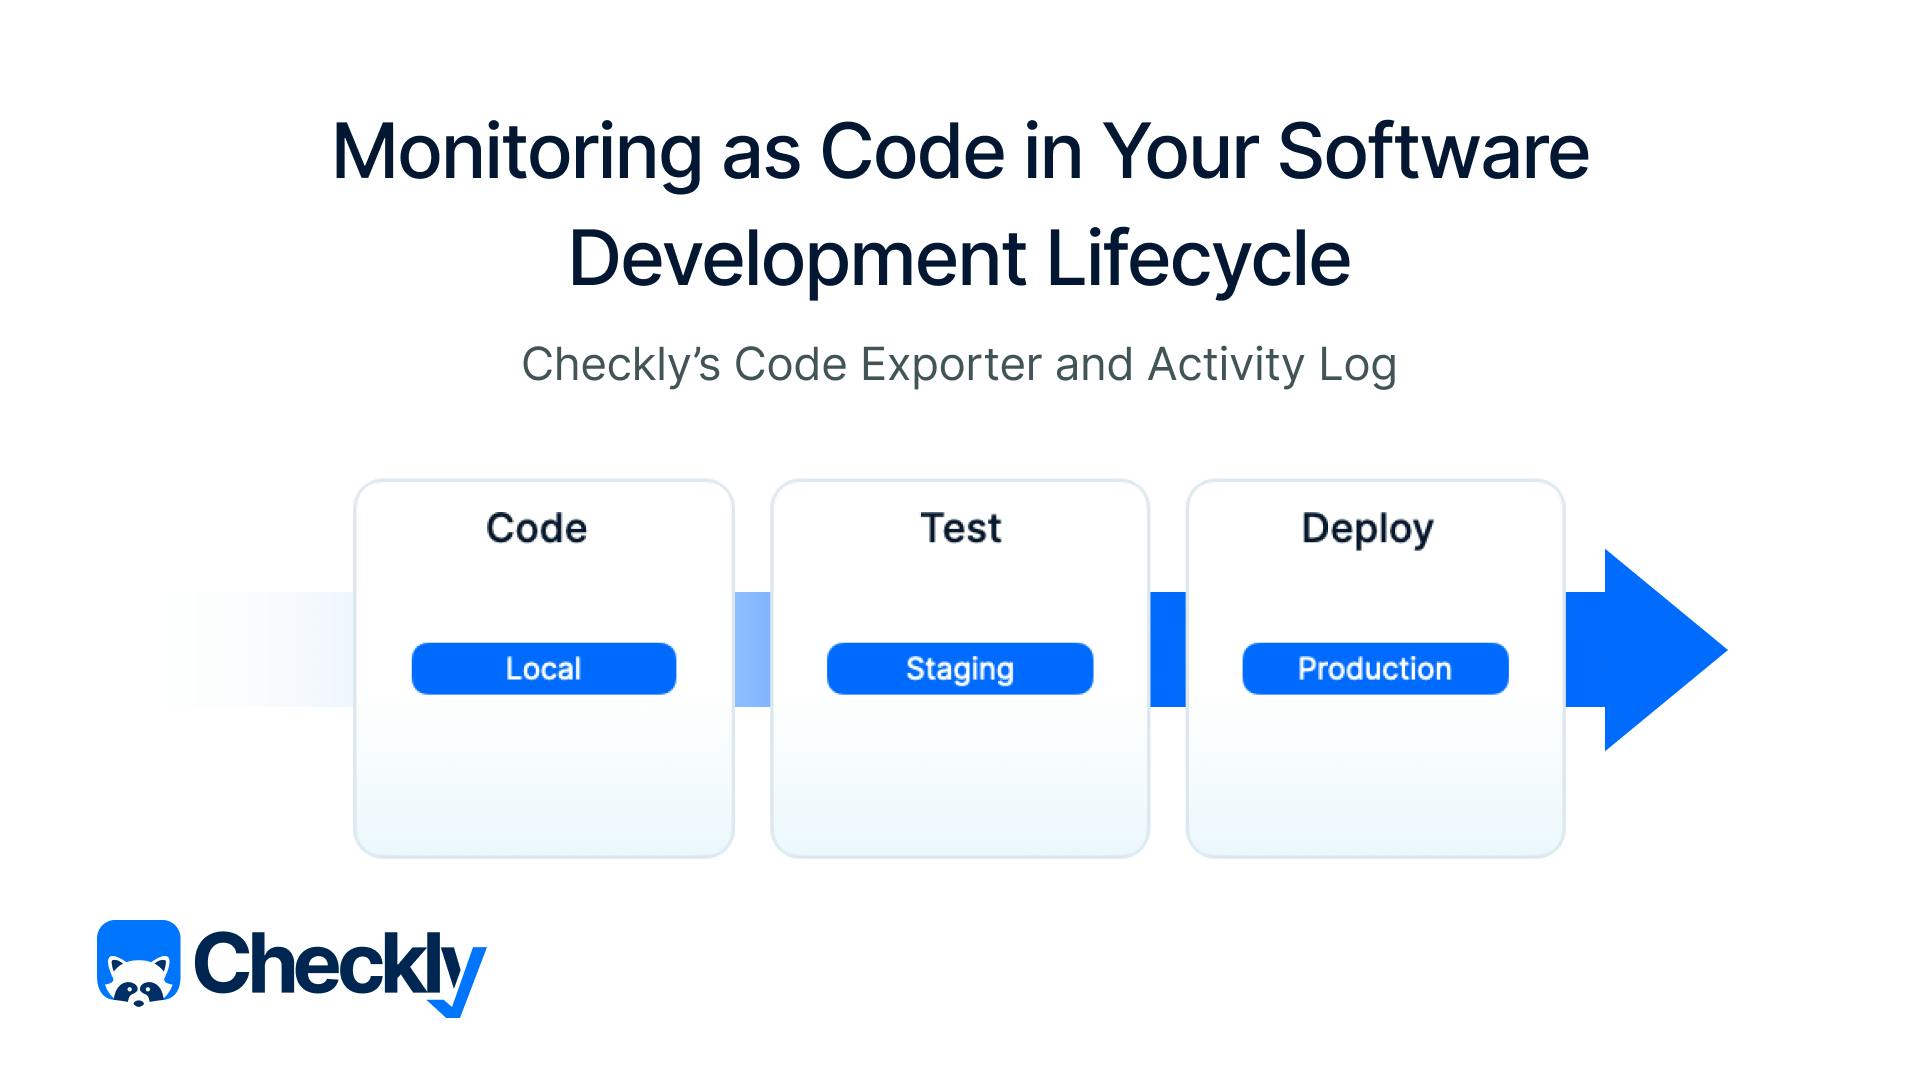 Monitoring as Code in Your Software Development Lifecycle